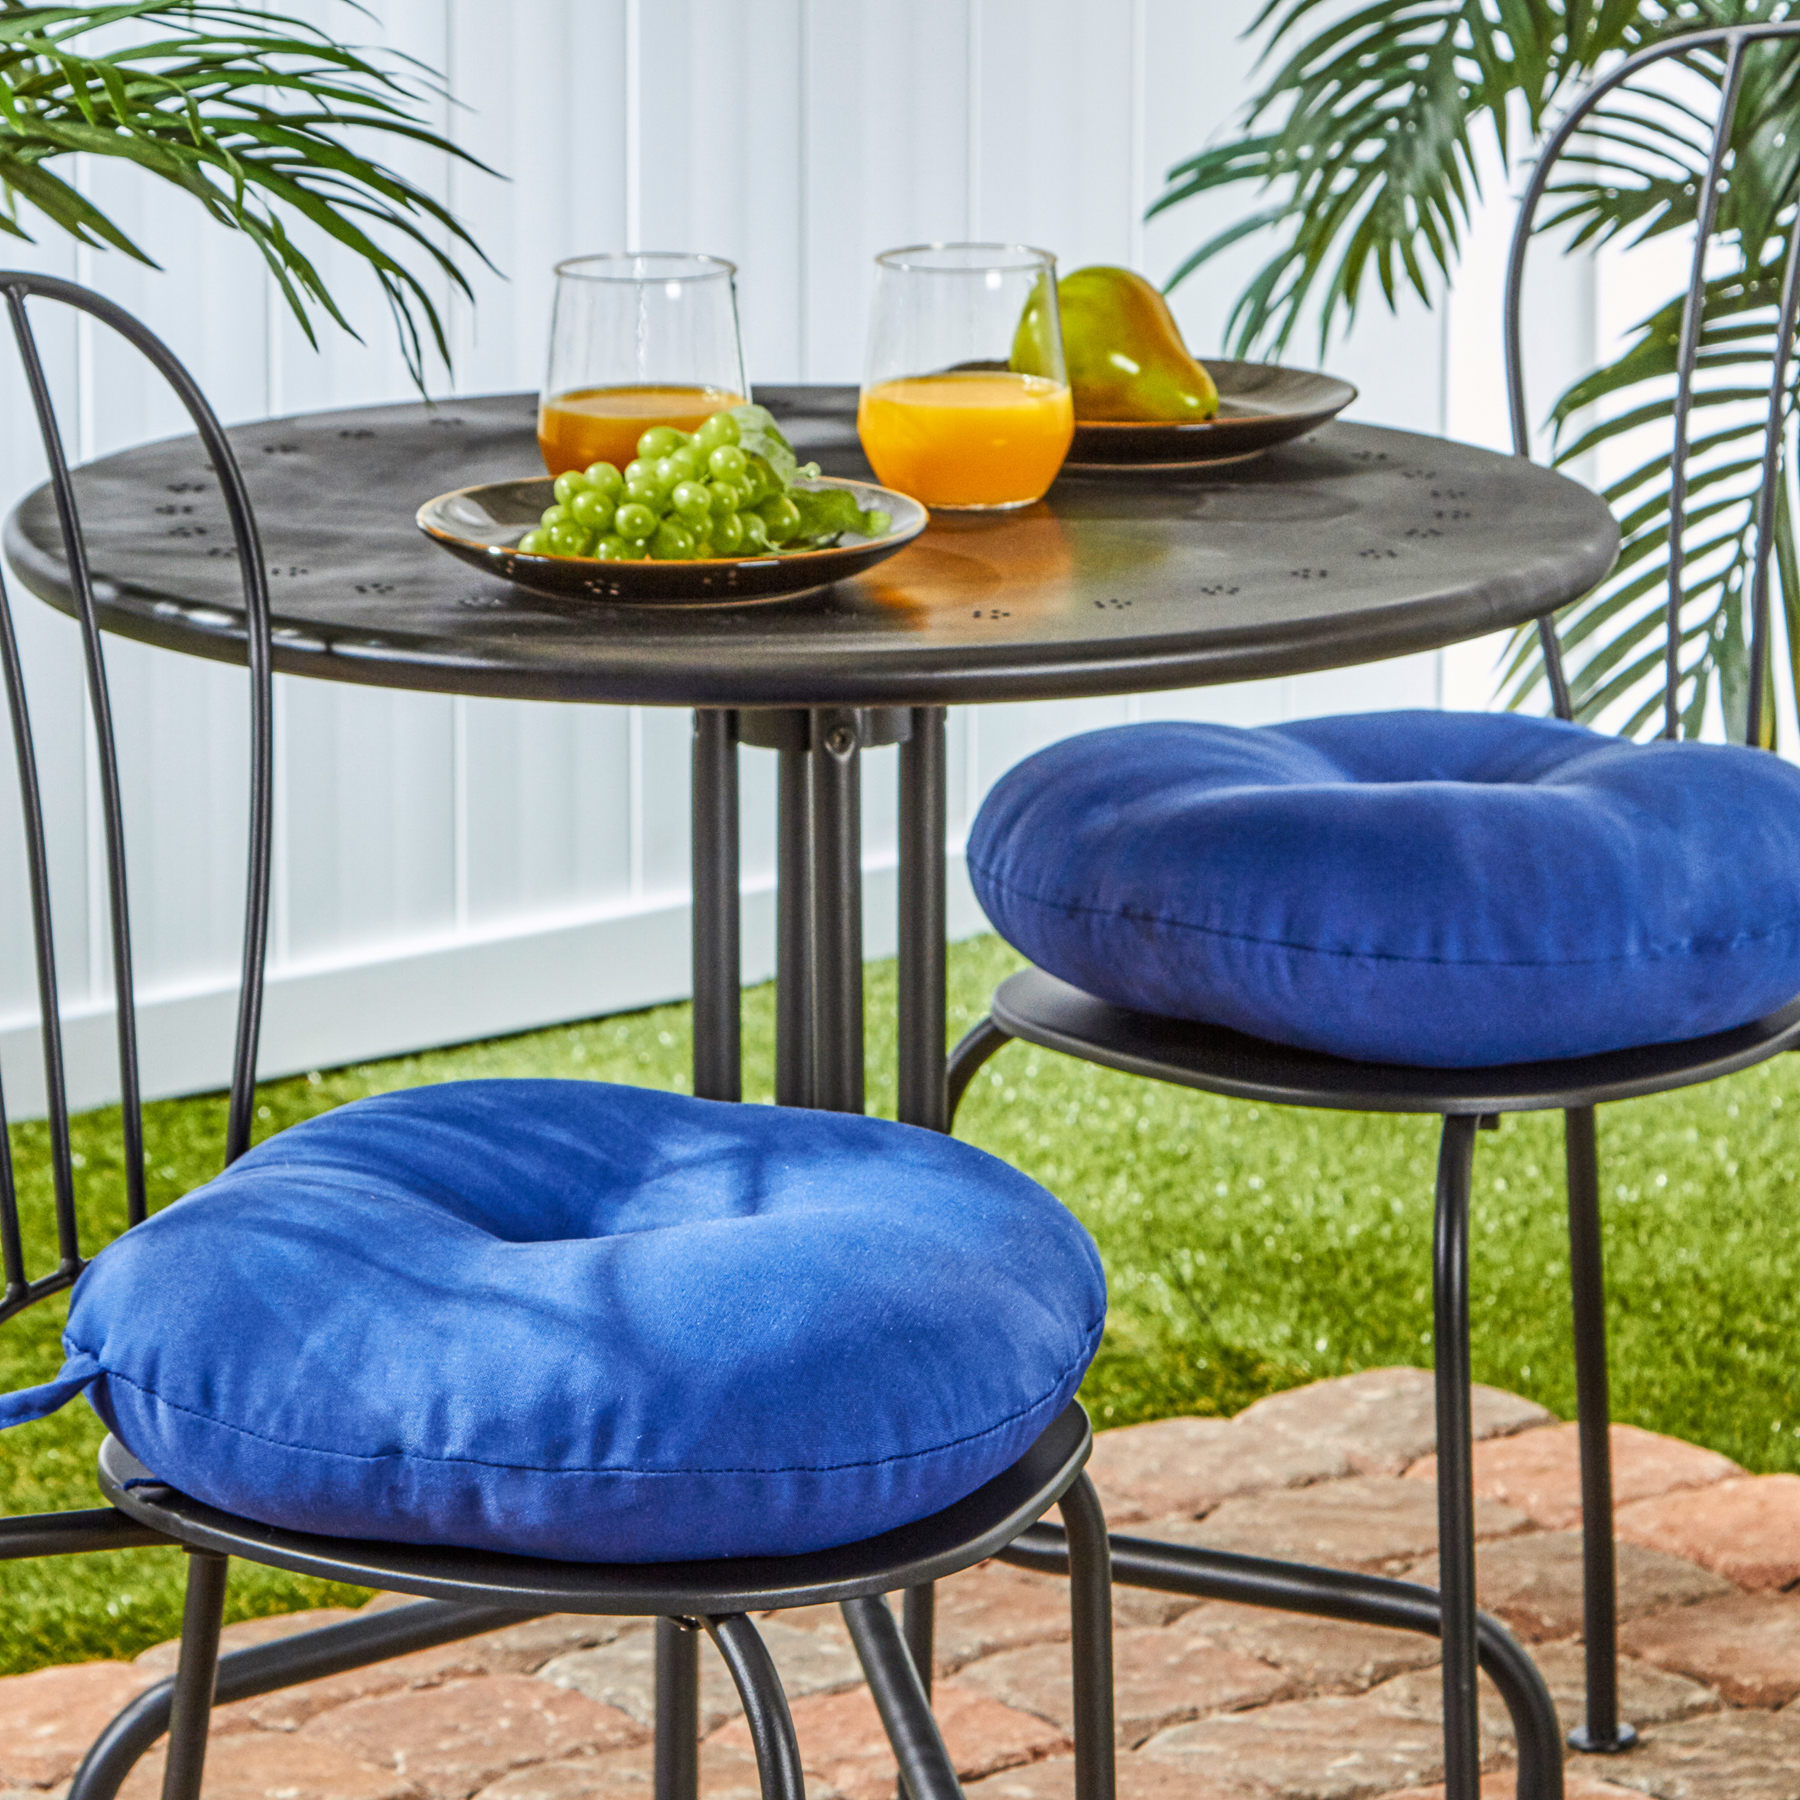 Greendale Home Fashions Marine Blue 15 in. Round Outdoor Reversible Bistro Seat Cushion (Set of 2) - image 3 of 6